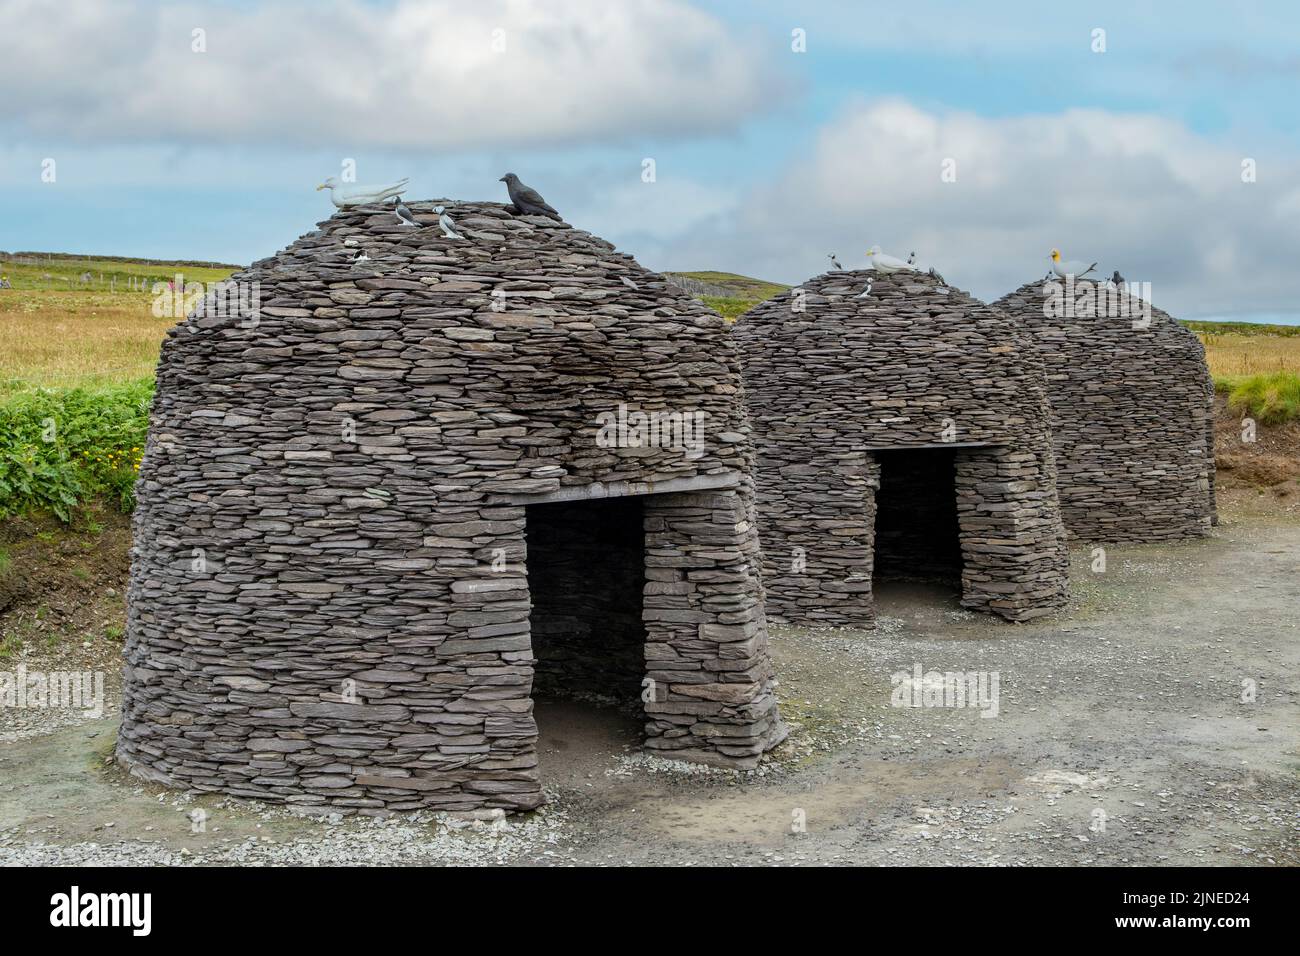 Beehive Huts at Kerry Cliffs, near Portmagee, Co. Kerry, Ireland Stock Photo